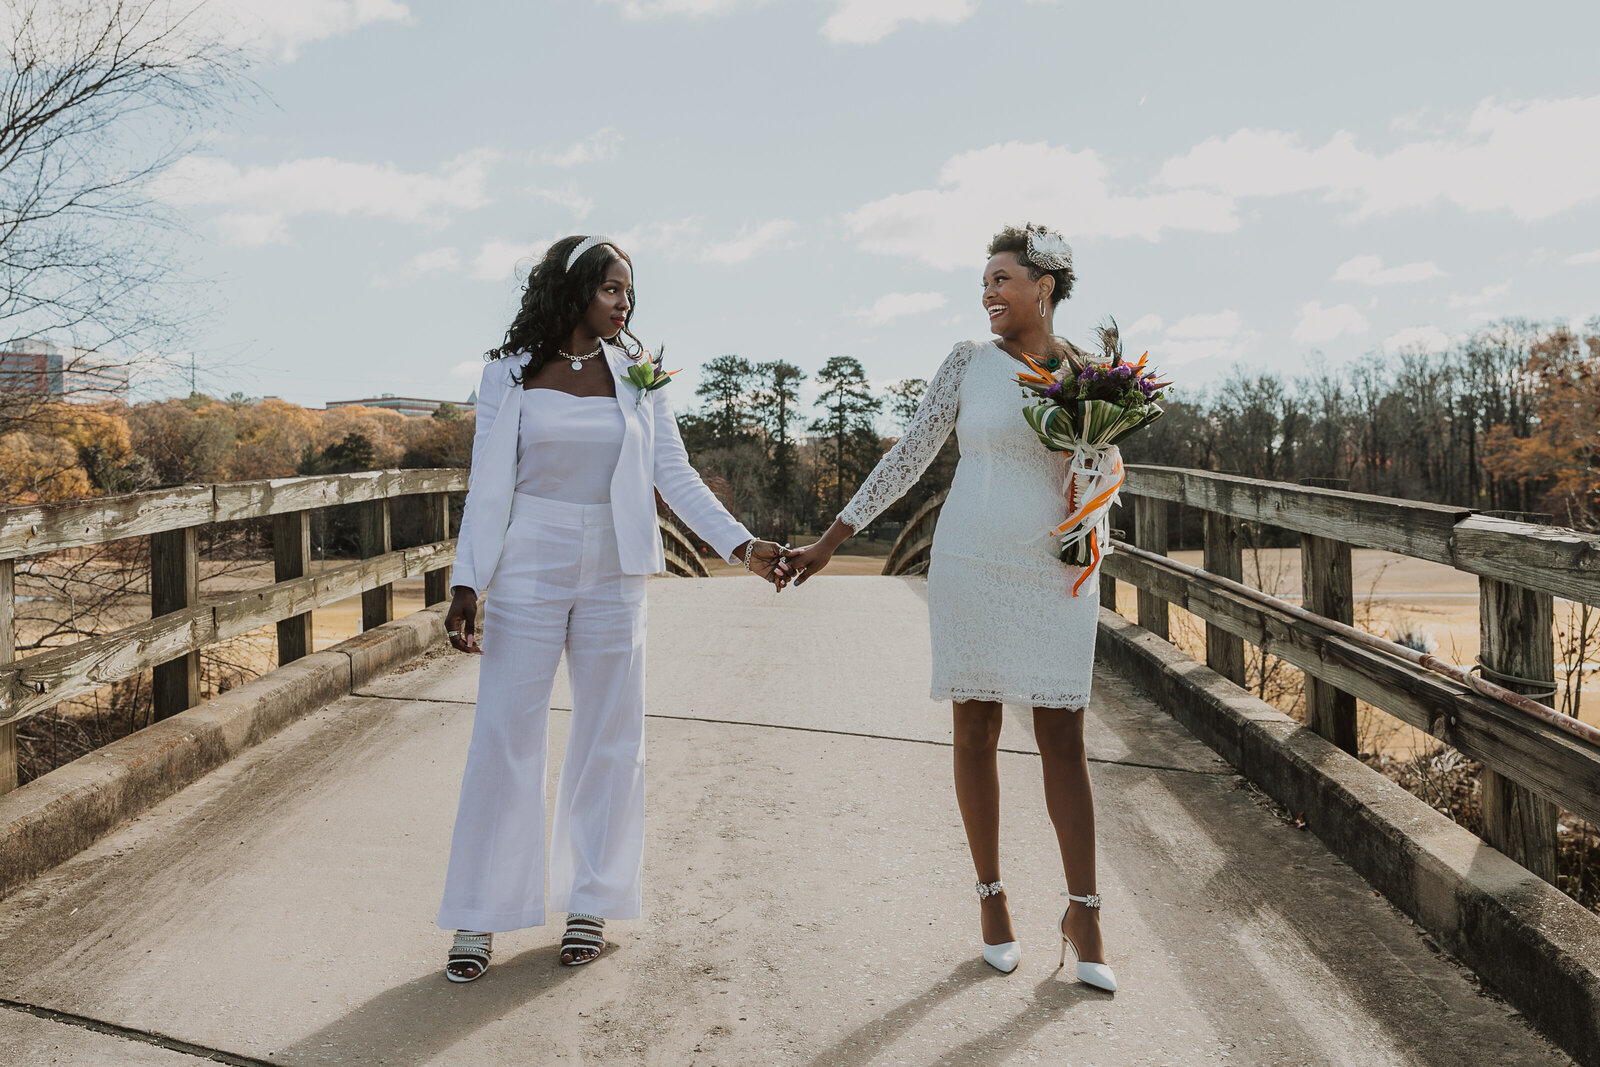 Timeless elegance meets modern love at Bobby Jones Golf Course. Capturing the beauty of a Black LGBTQ+ wedding ceremony